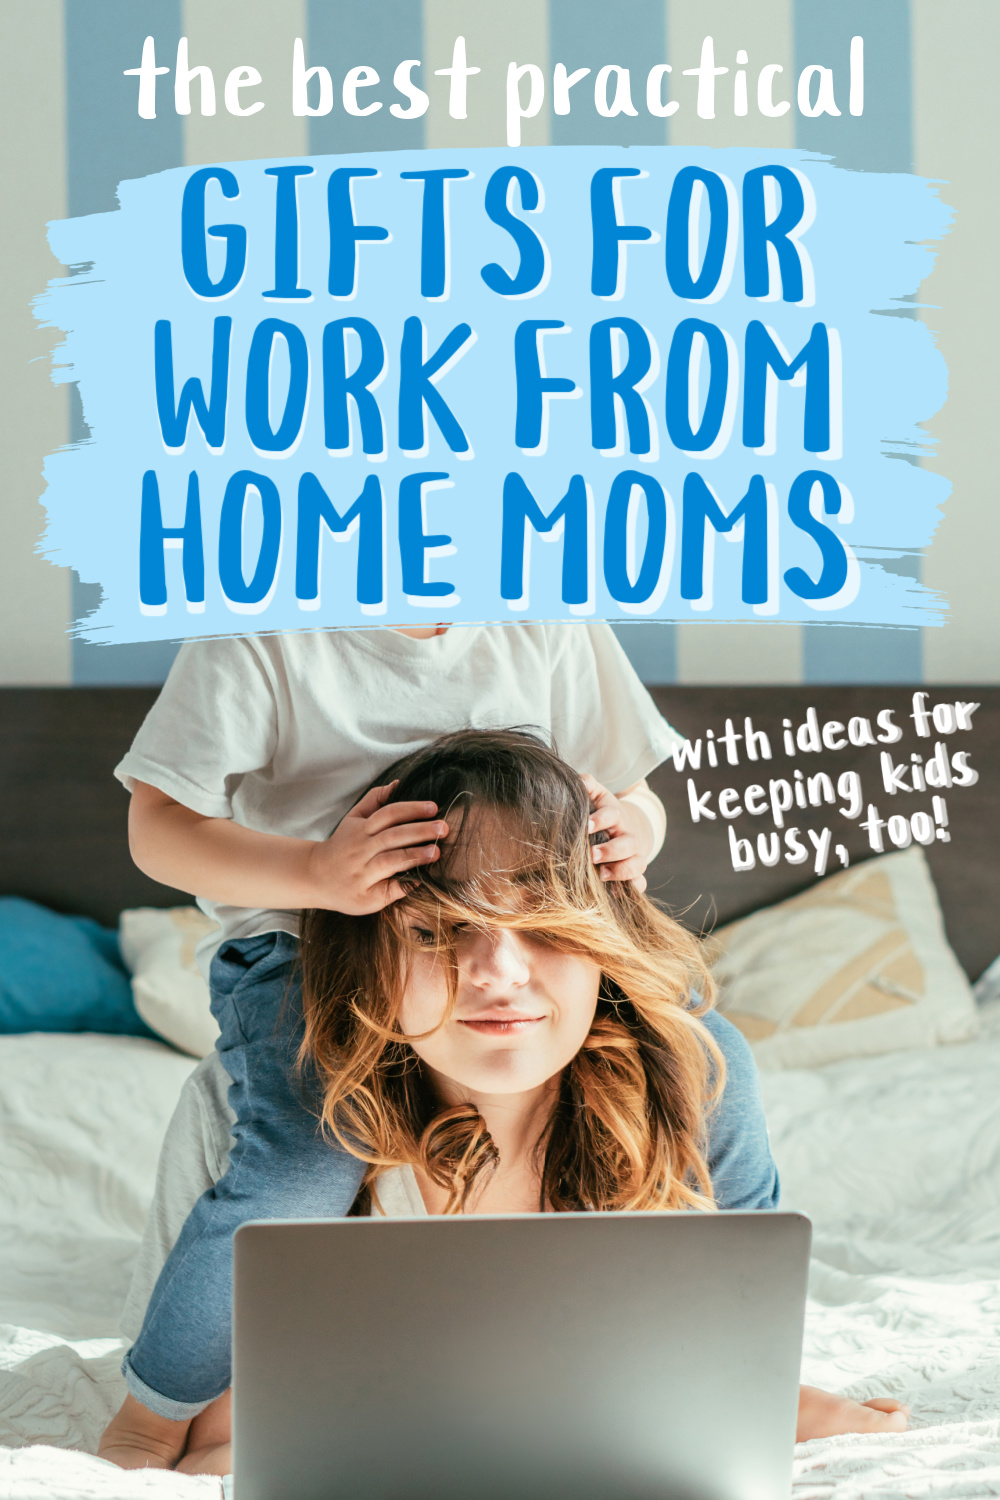 15 Must Have Gifts for Work from Home Moms - Helpful Online Marketer